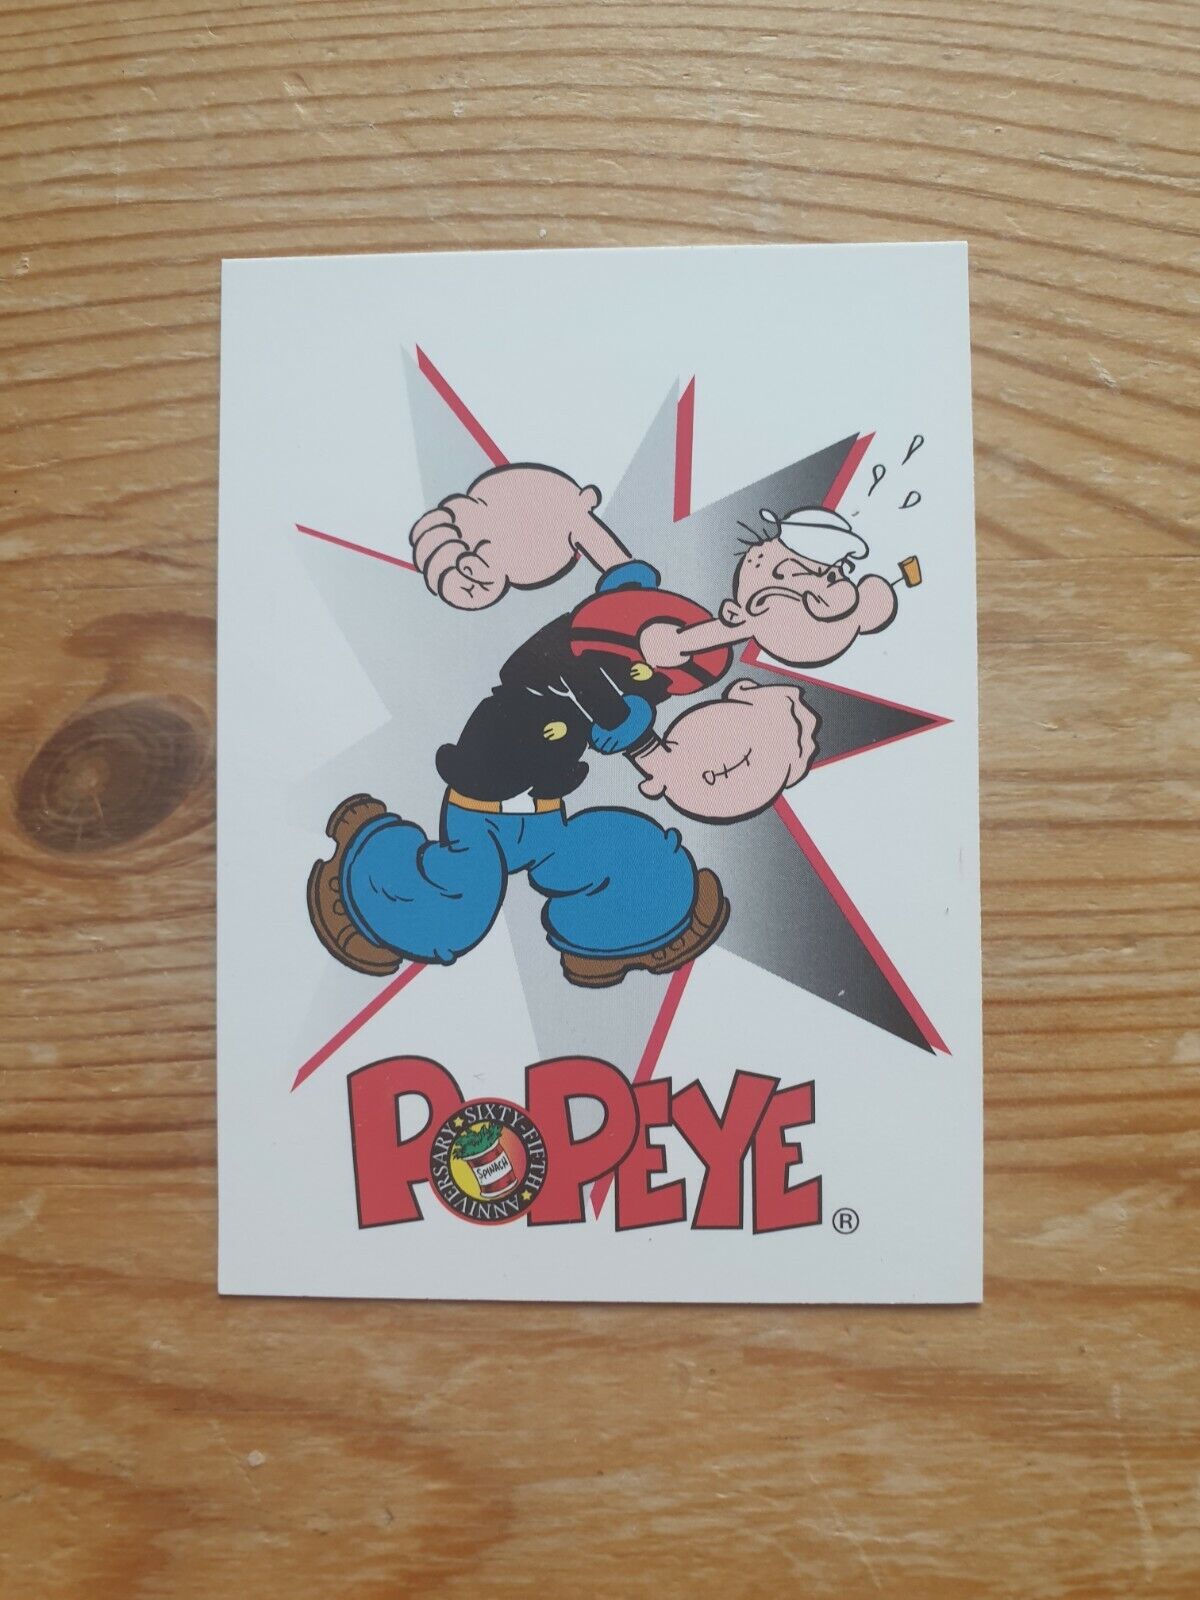 Popeye 65th Anniversary Trading Cards - 1994 - King Features - Various